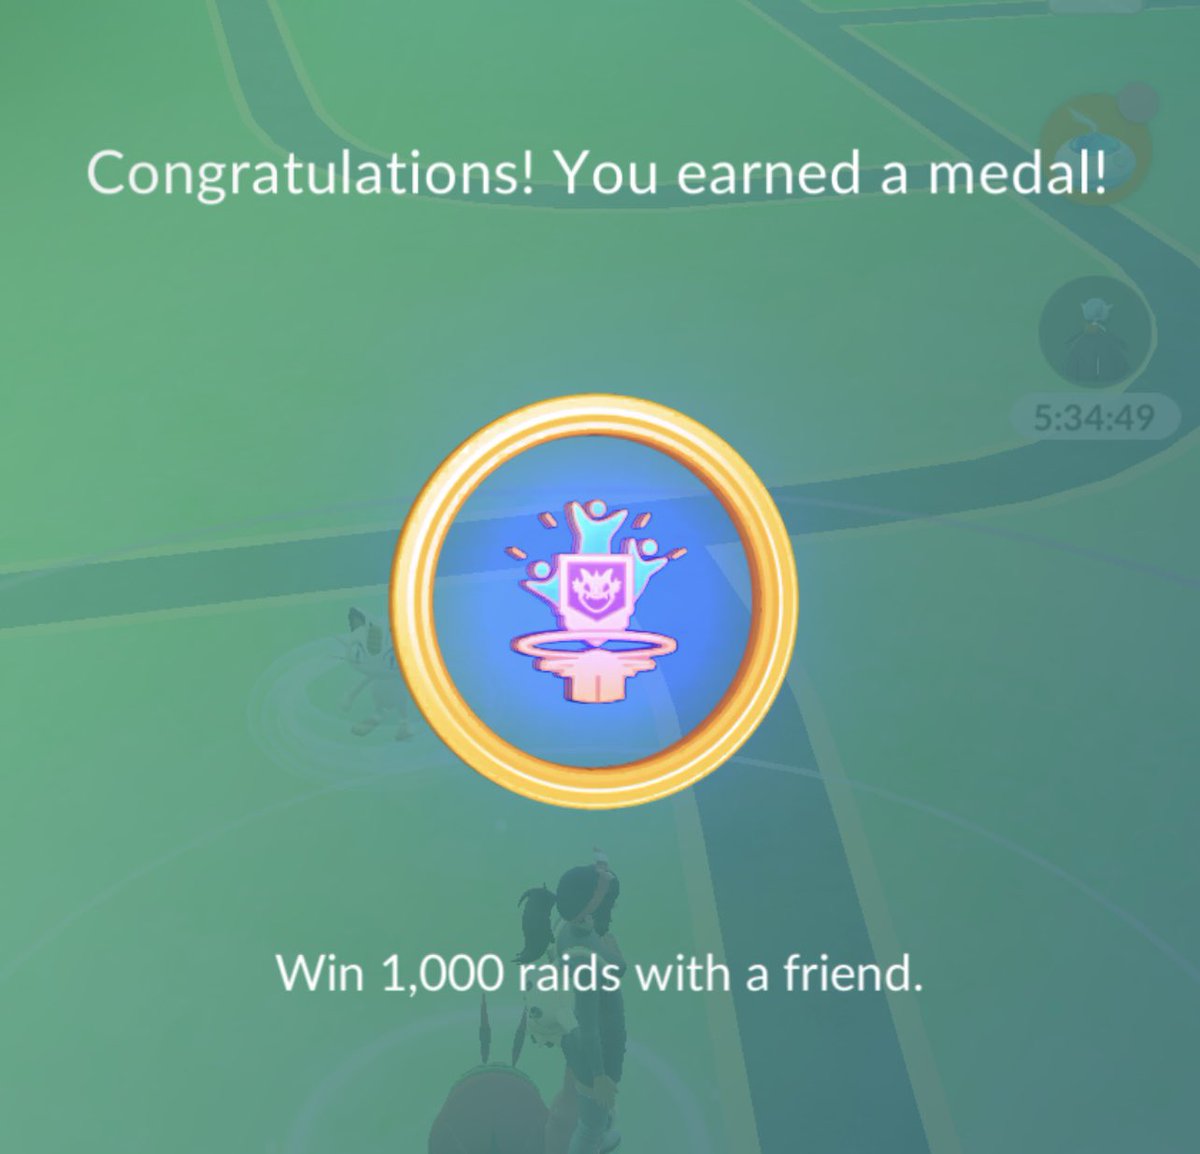 Thank you to everyone who has helped me earn this. Raiding is my favorite part of the game and how I get my strongest Pokémon. I appreciate you guys @WHITEHEAD305, @autumnapollonia, @_Gx100 and @HumphriesKati and many more. #PokemonGO #pokemonraids #PokemonGOApp #PokemonGOfriend